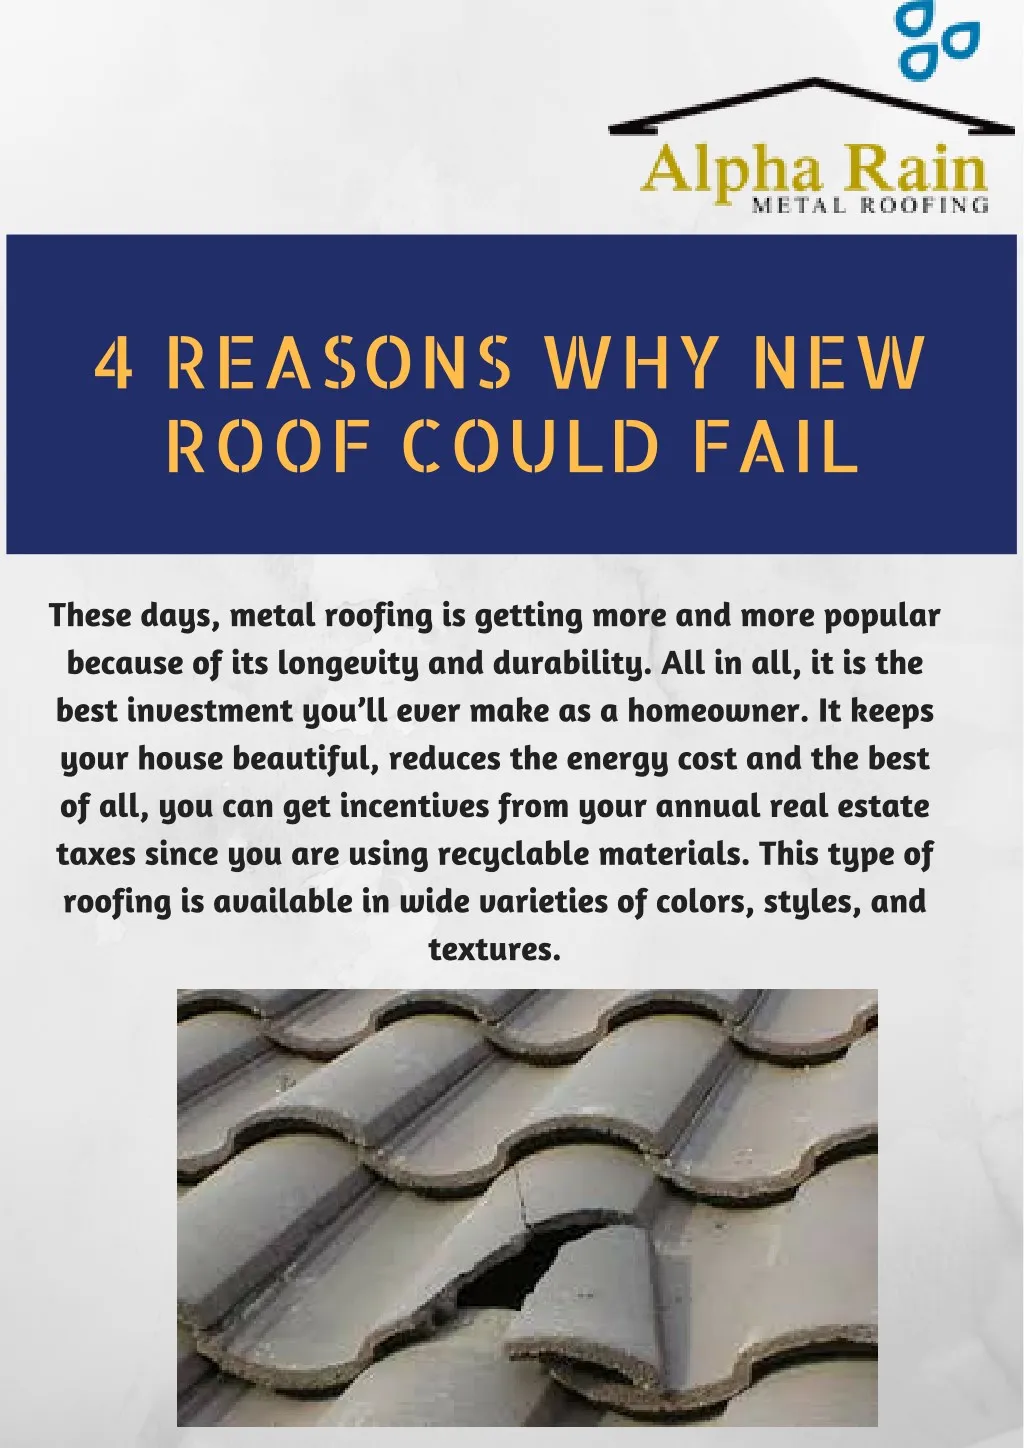 4 reasons why new roof could fail